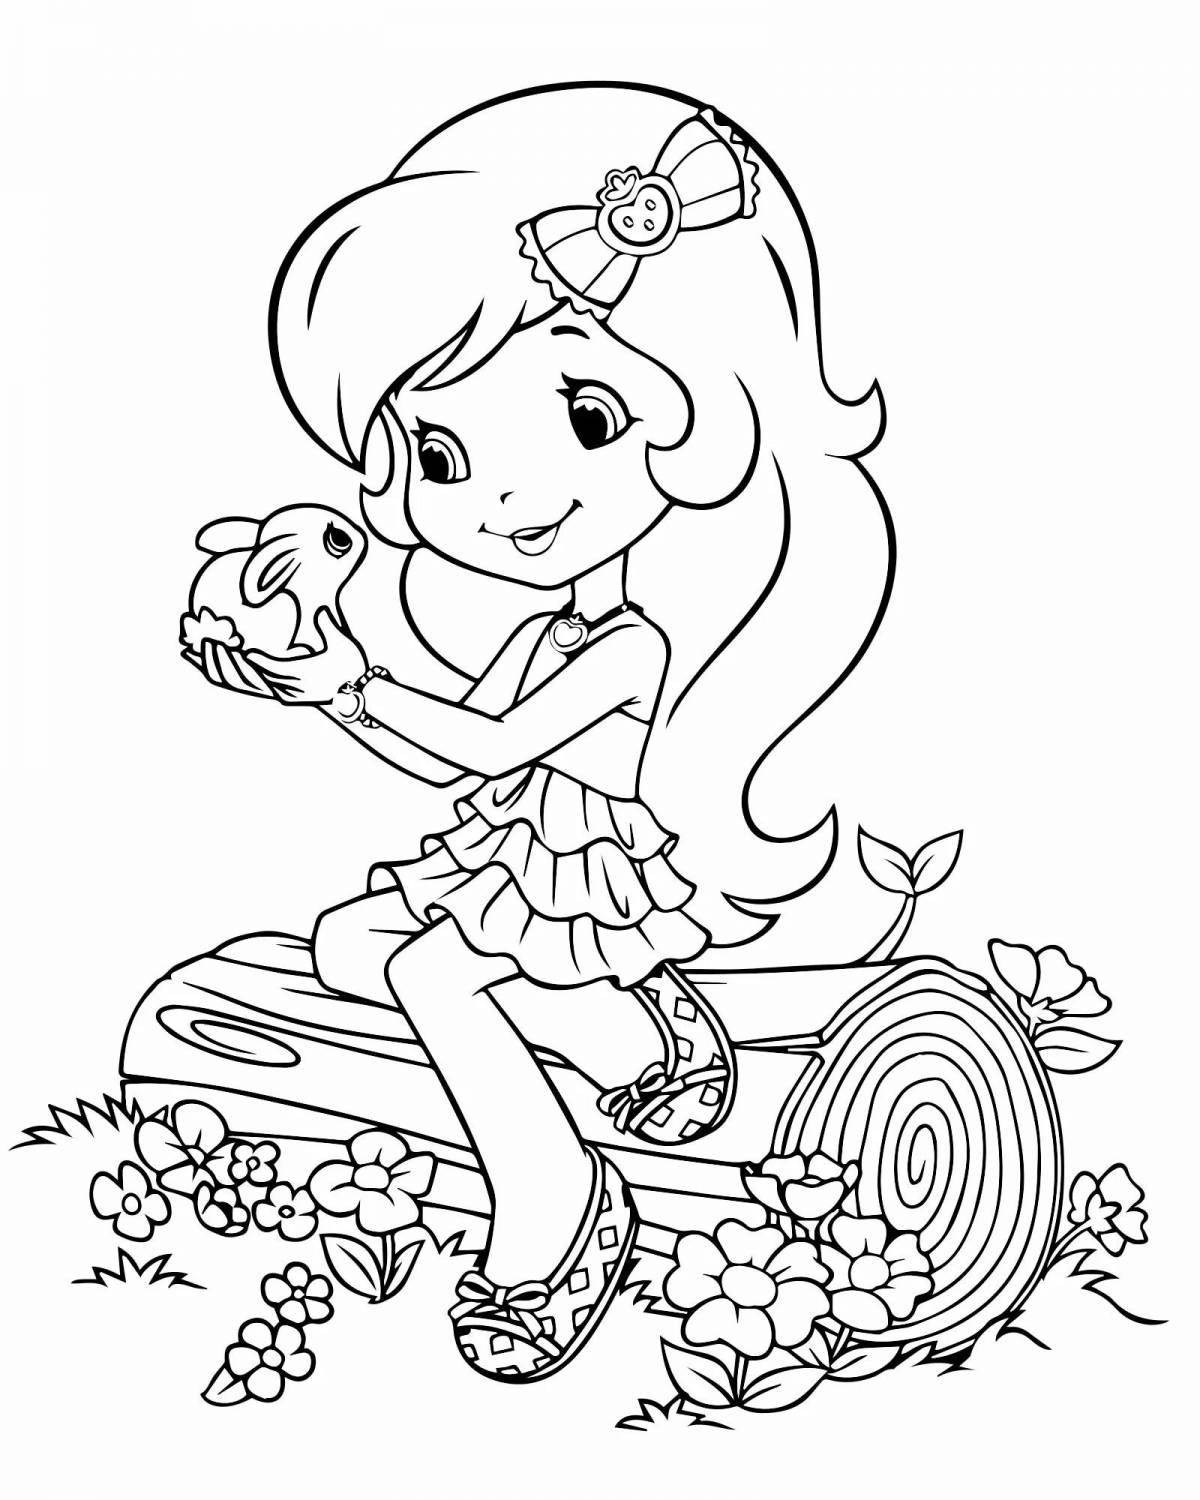 Whimsical coloring book for 5 year olds for girls